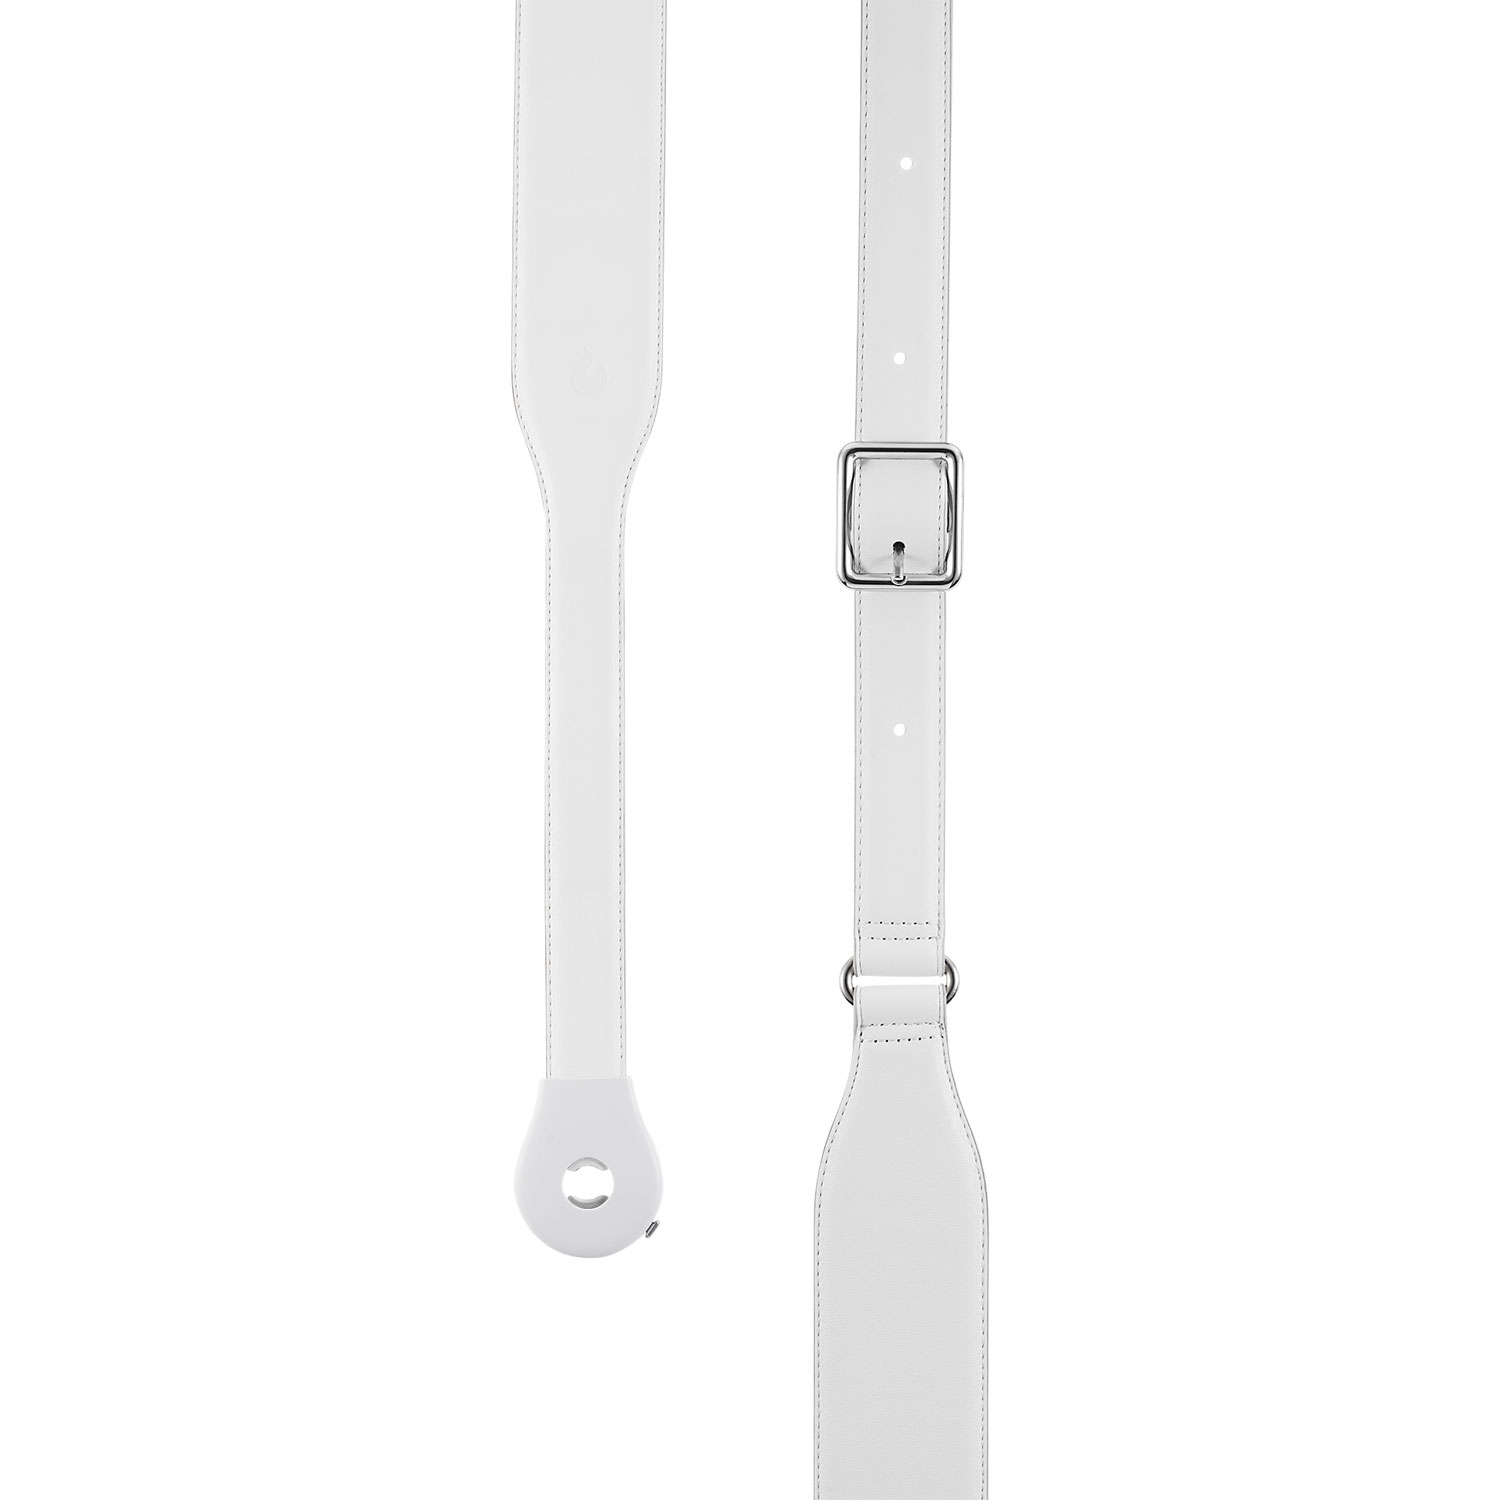 LAVA Ideal Strap 2 Guitar Strap for ME & Blue Touch Series - White